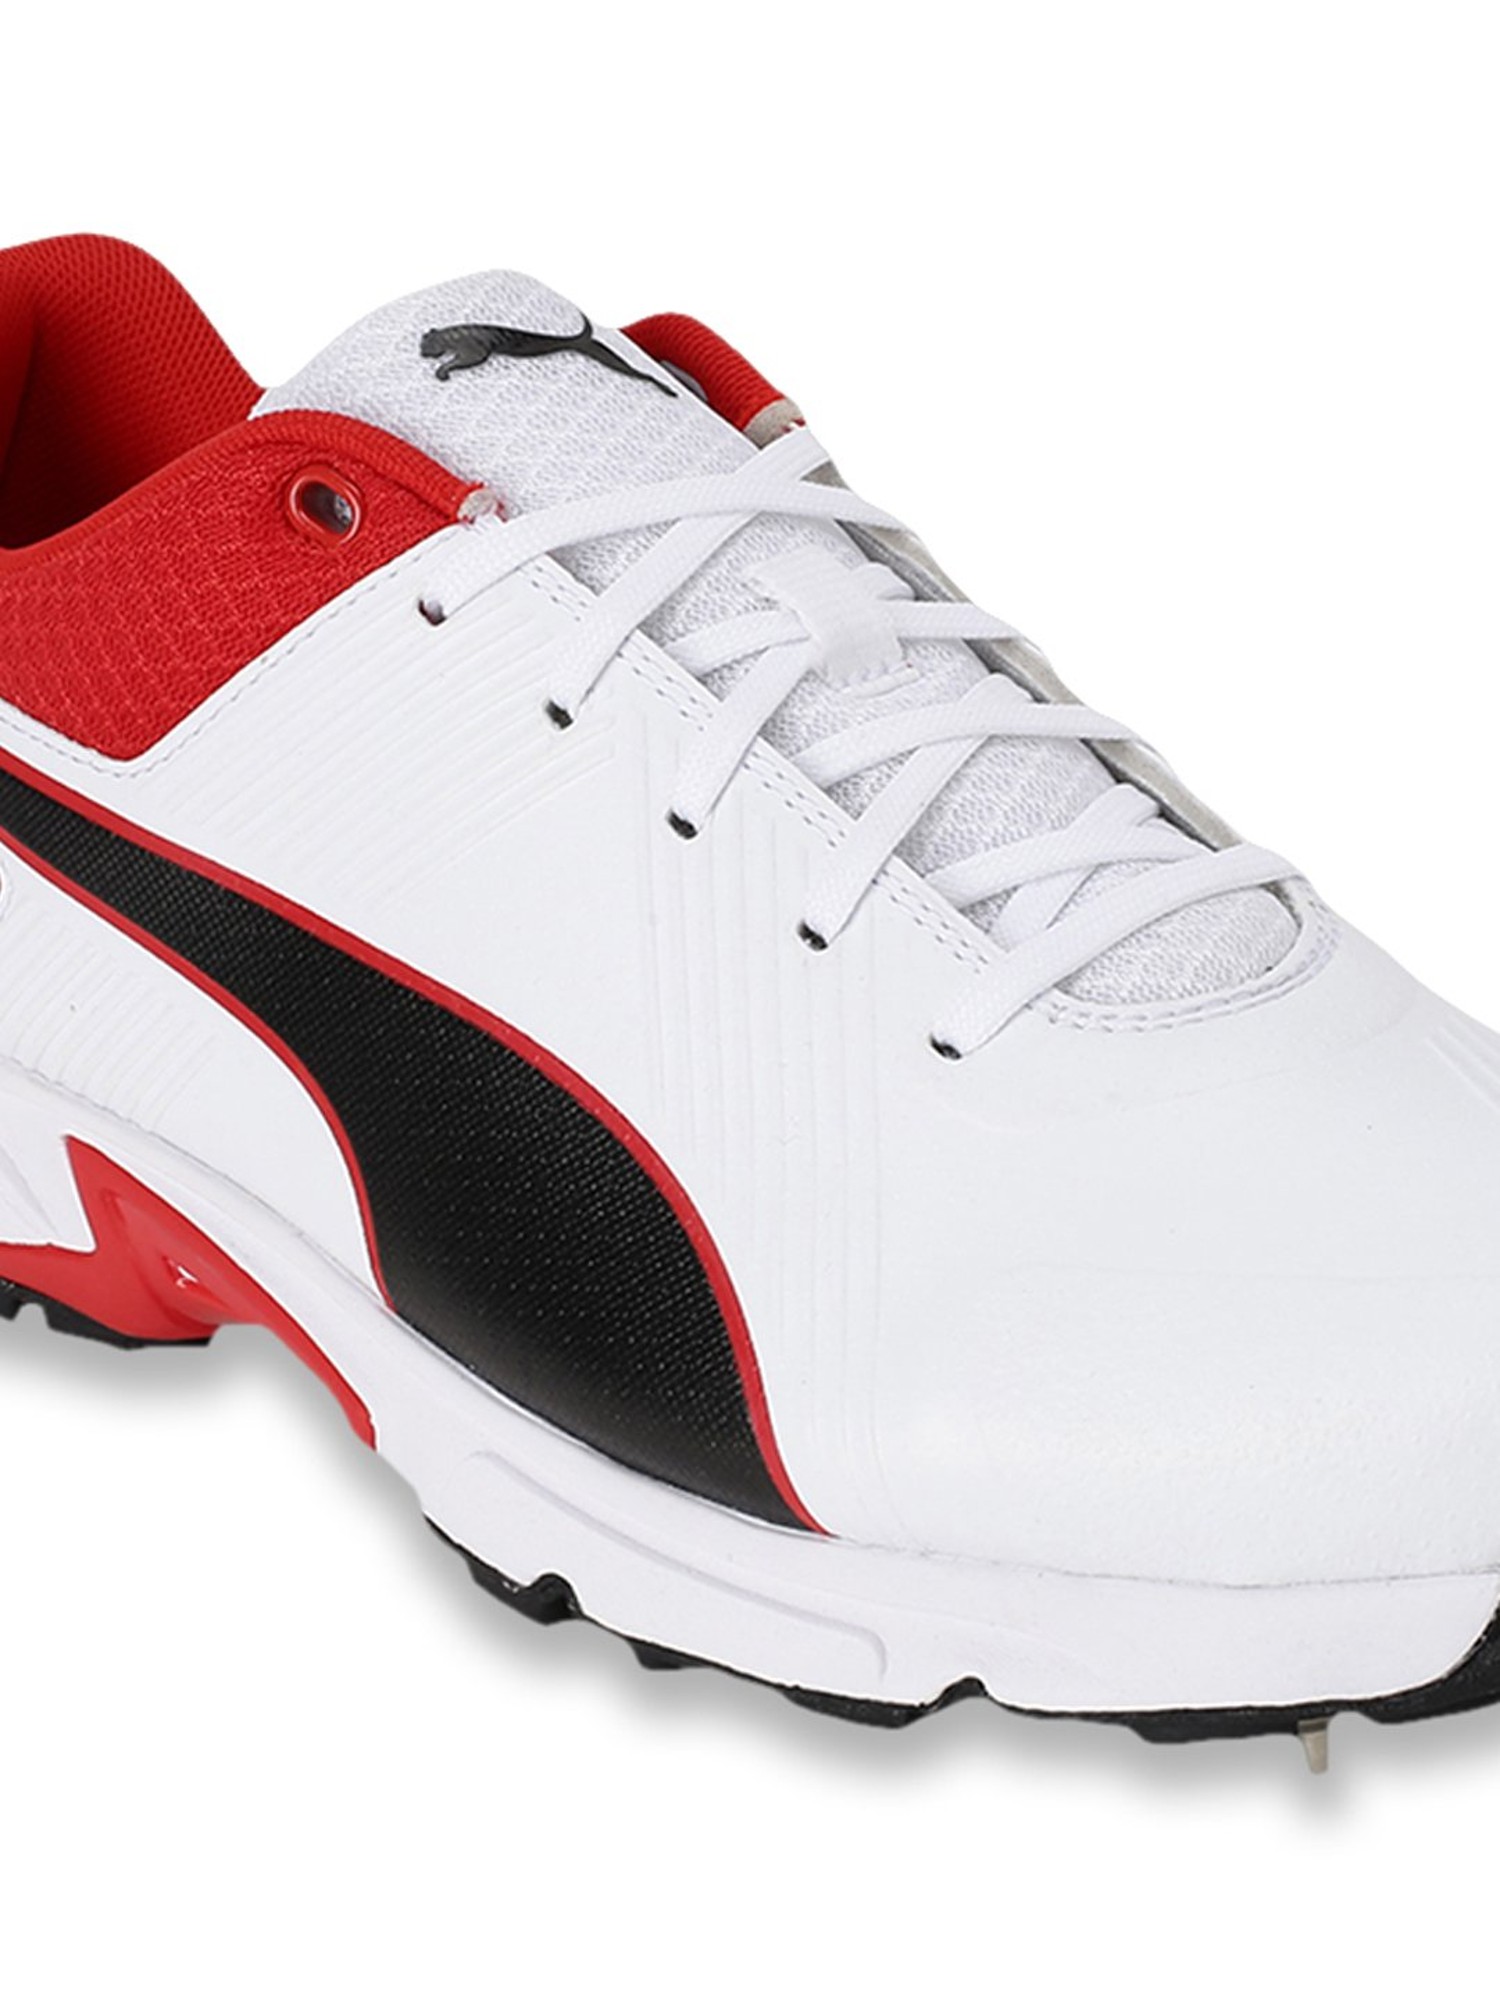 puma red cricket shoes